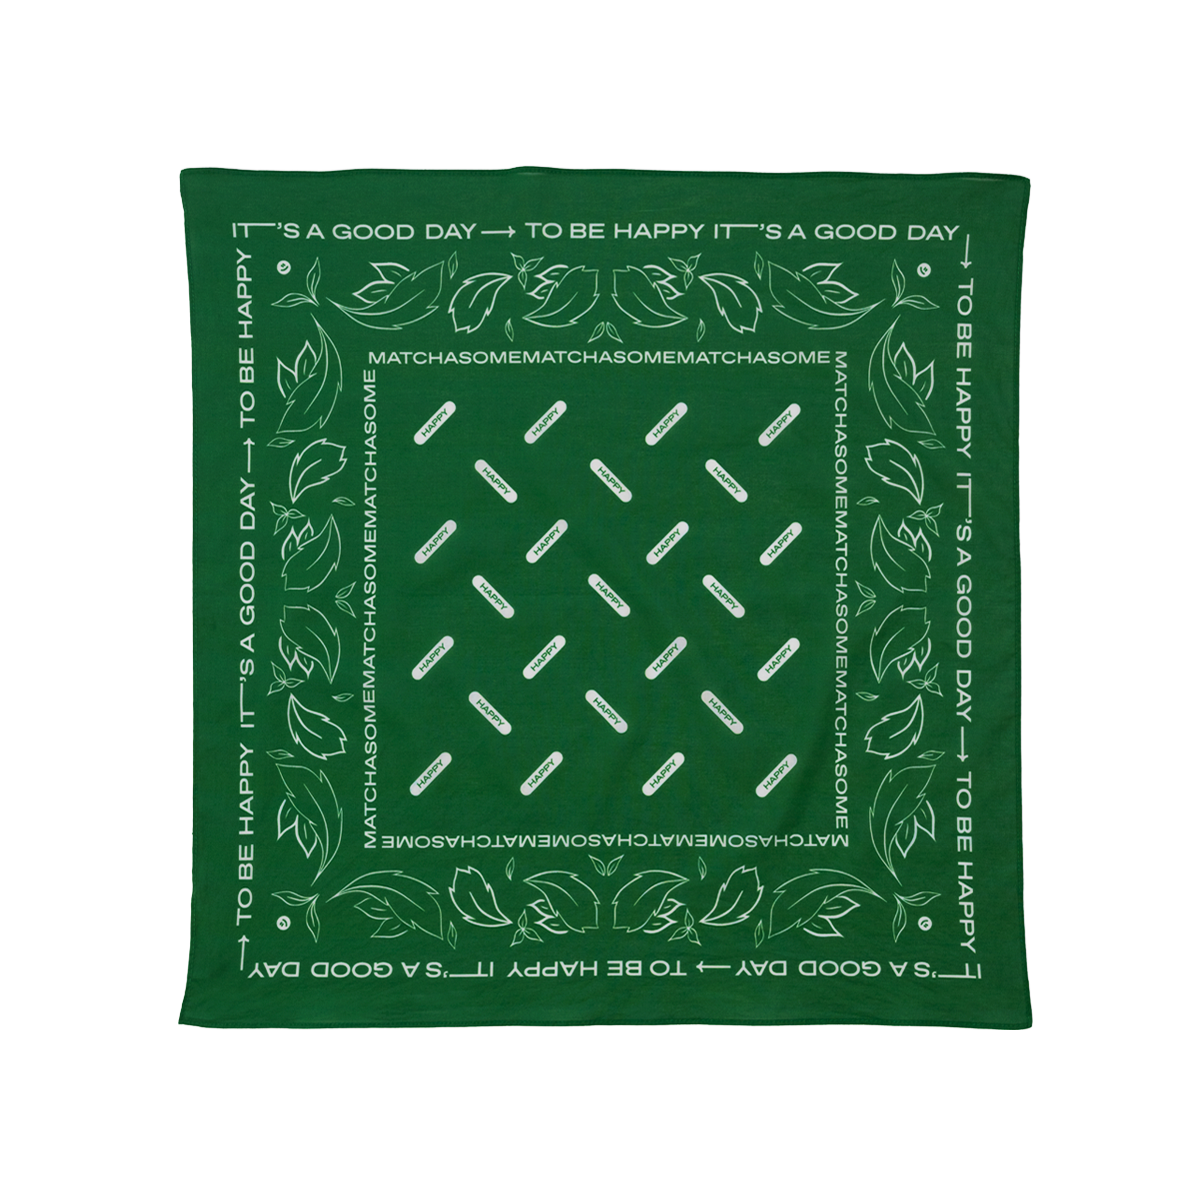 Our green matchasome bandana for all lovers of matcha tea